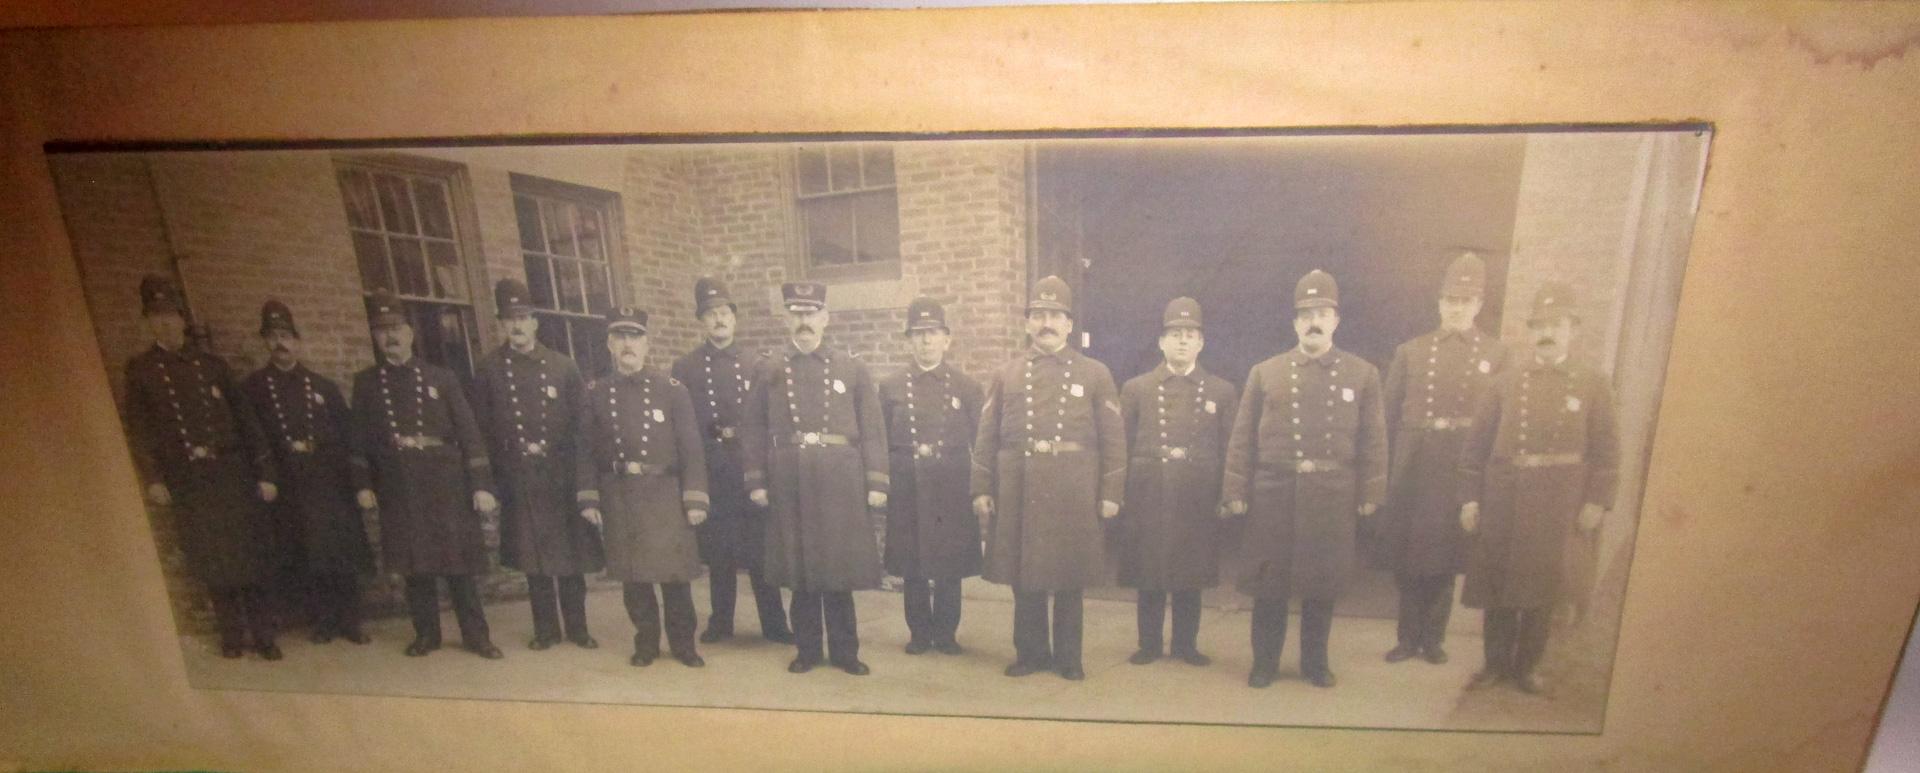 Rare panorama framed photograph of 13 United States police officers in full uniform. Circa 1907. The old wooden frame painted black appears to be the original and measures .75 inches wide. The photograph itself measure 20.50 inches wide x 8 inches